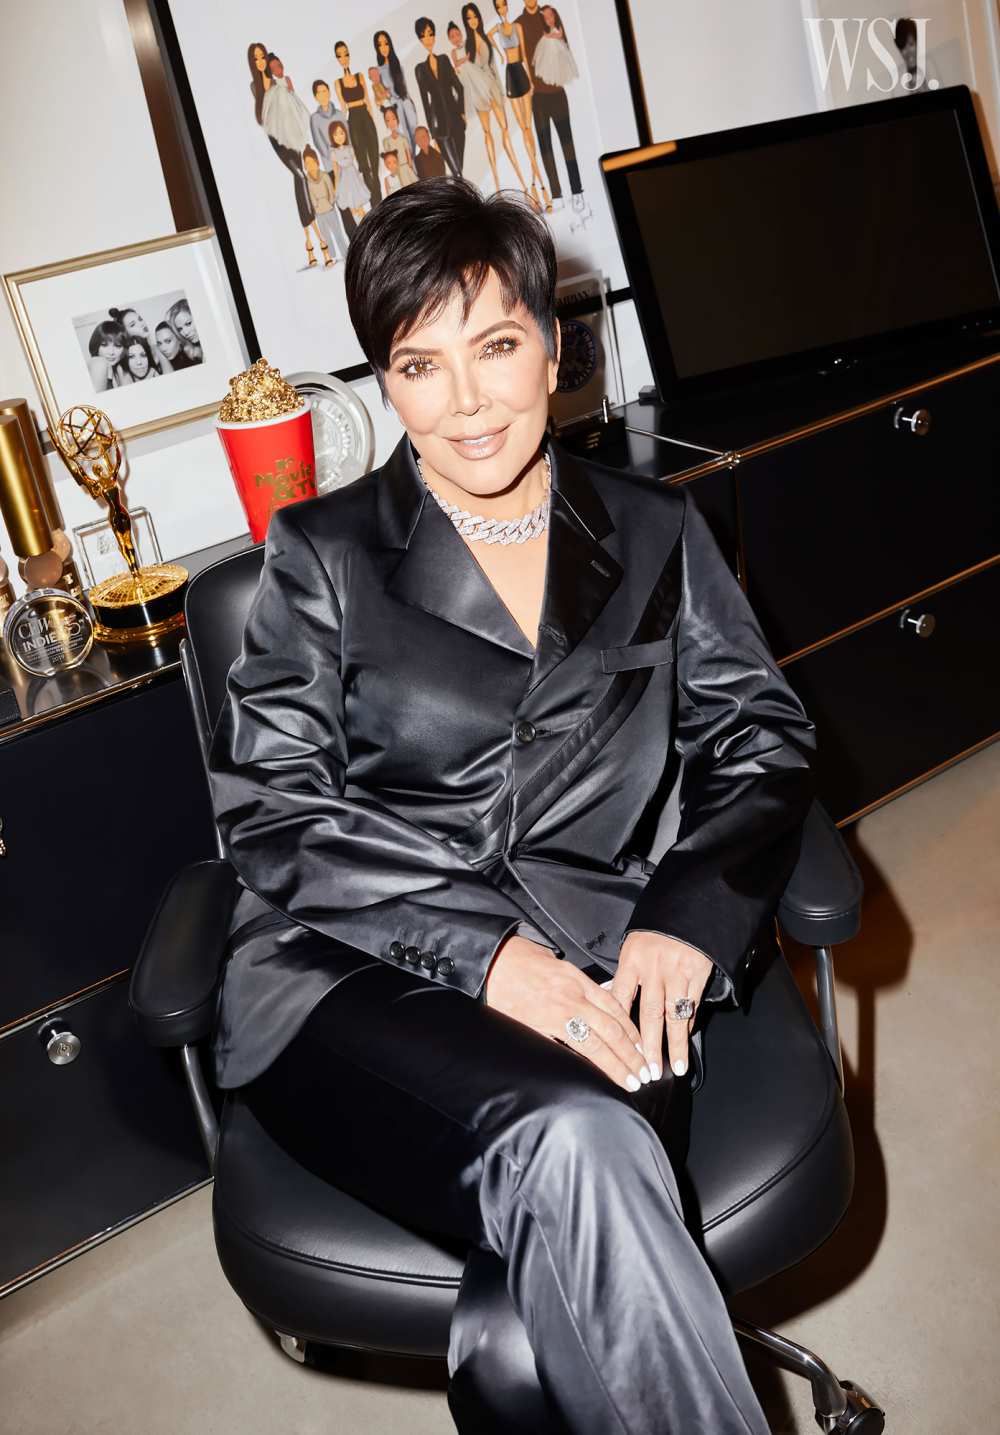 It’s Official! Kris Jenner Has a Skincare Line Ready to Launch